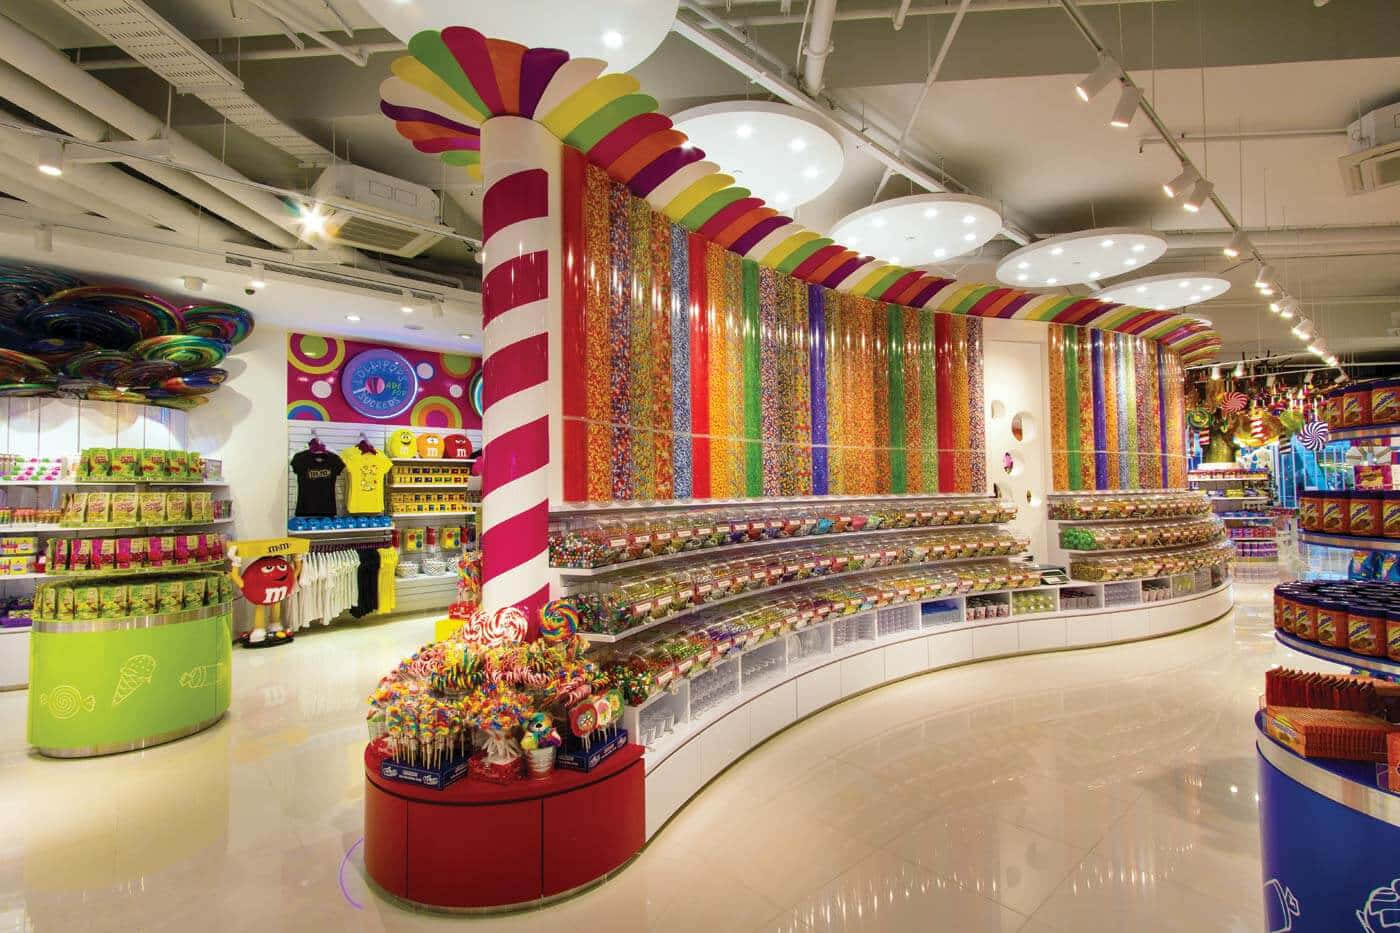 A Candy Store With Many Candy Products